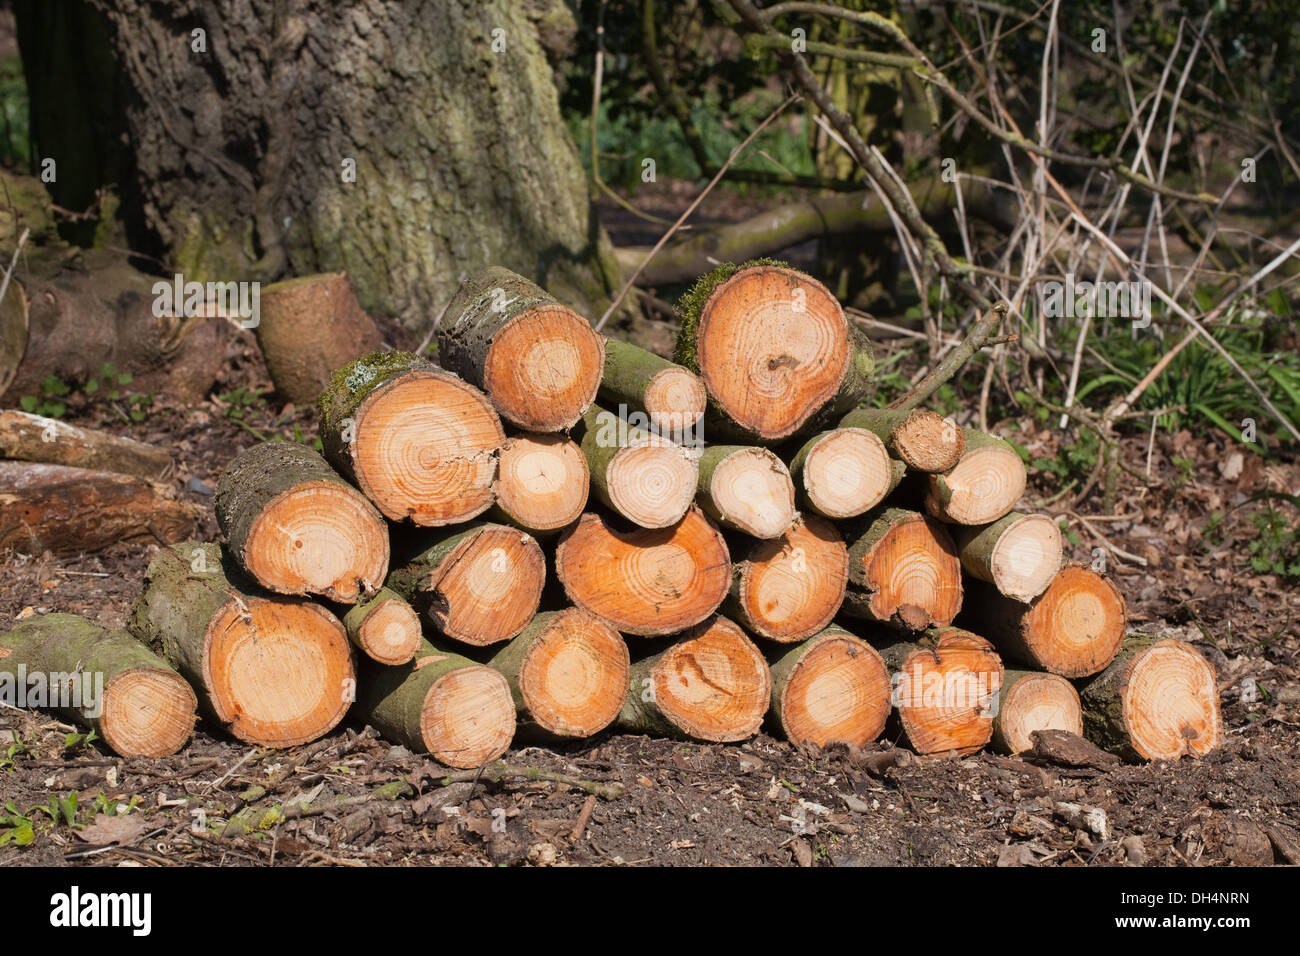 Common Ash (Fraxinus excelsior). Freshly cut, chainsawn logs. Stock Photo